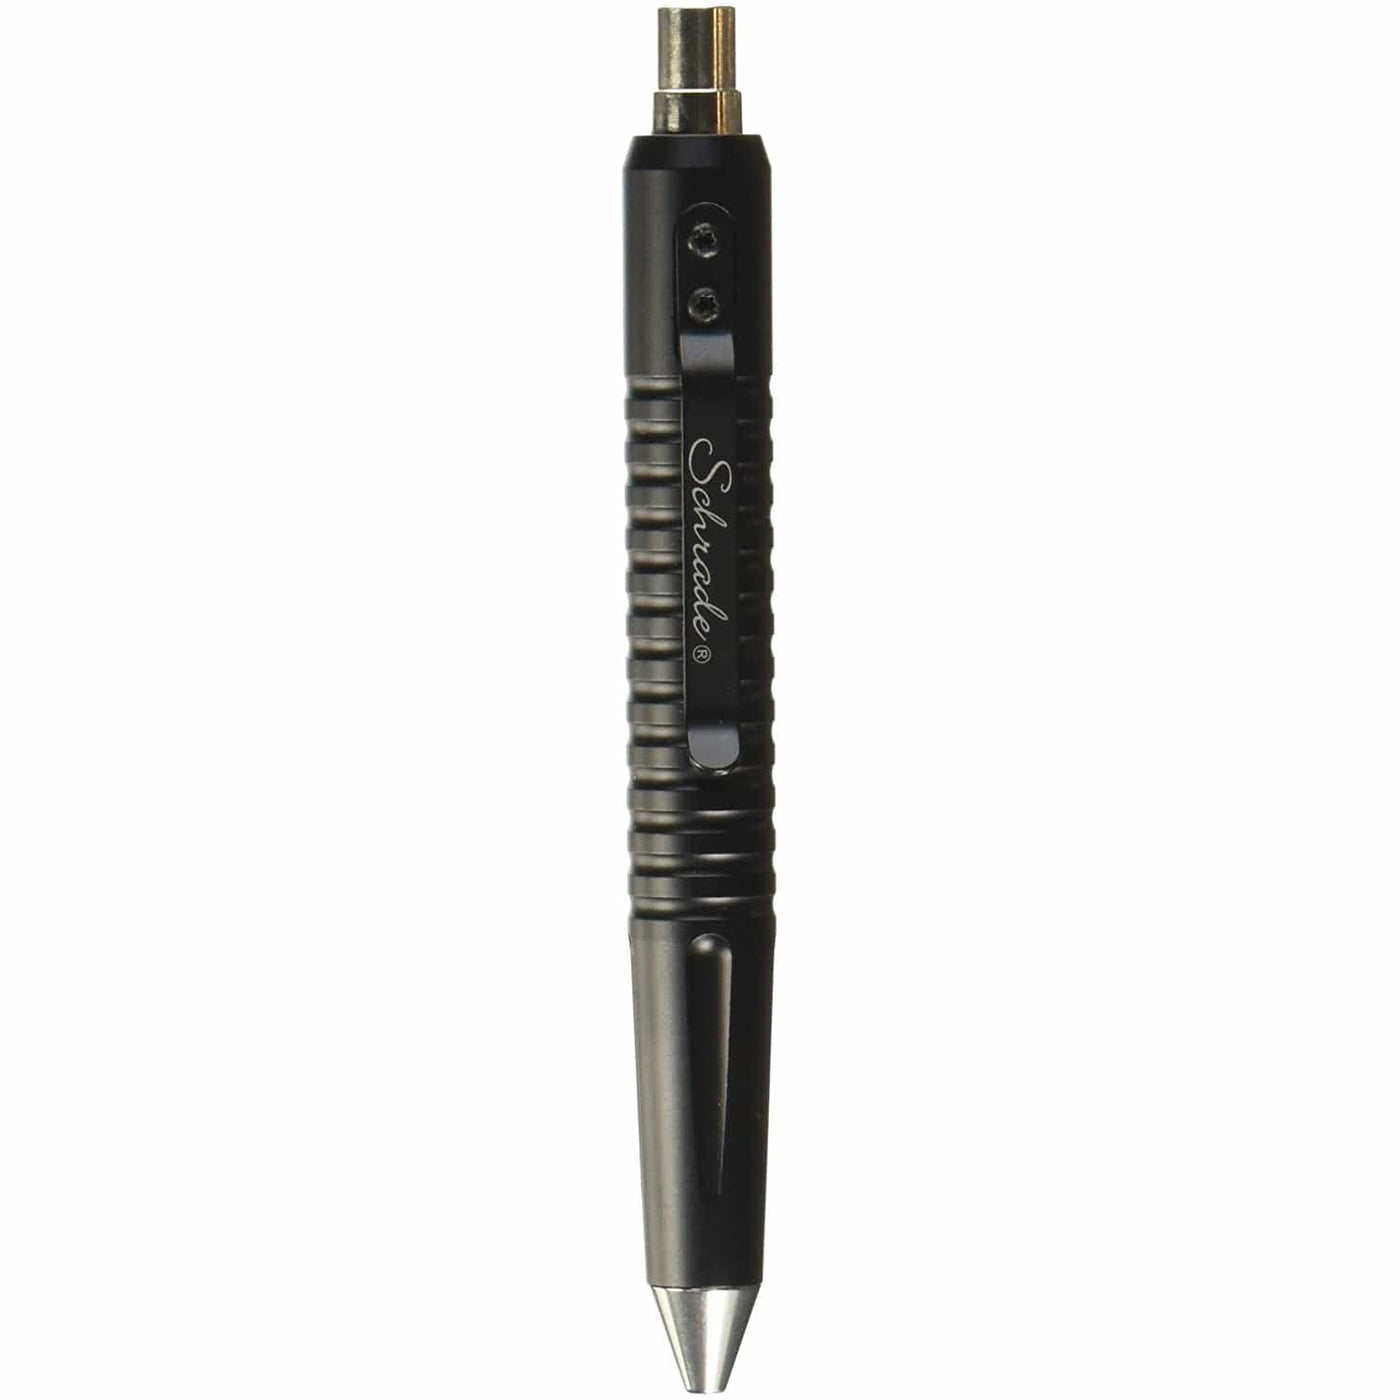 Schrade Schrade Tactical Push Button Pen Black Gifts And Novelty